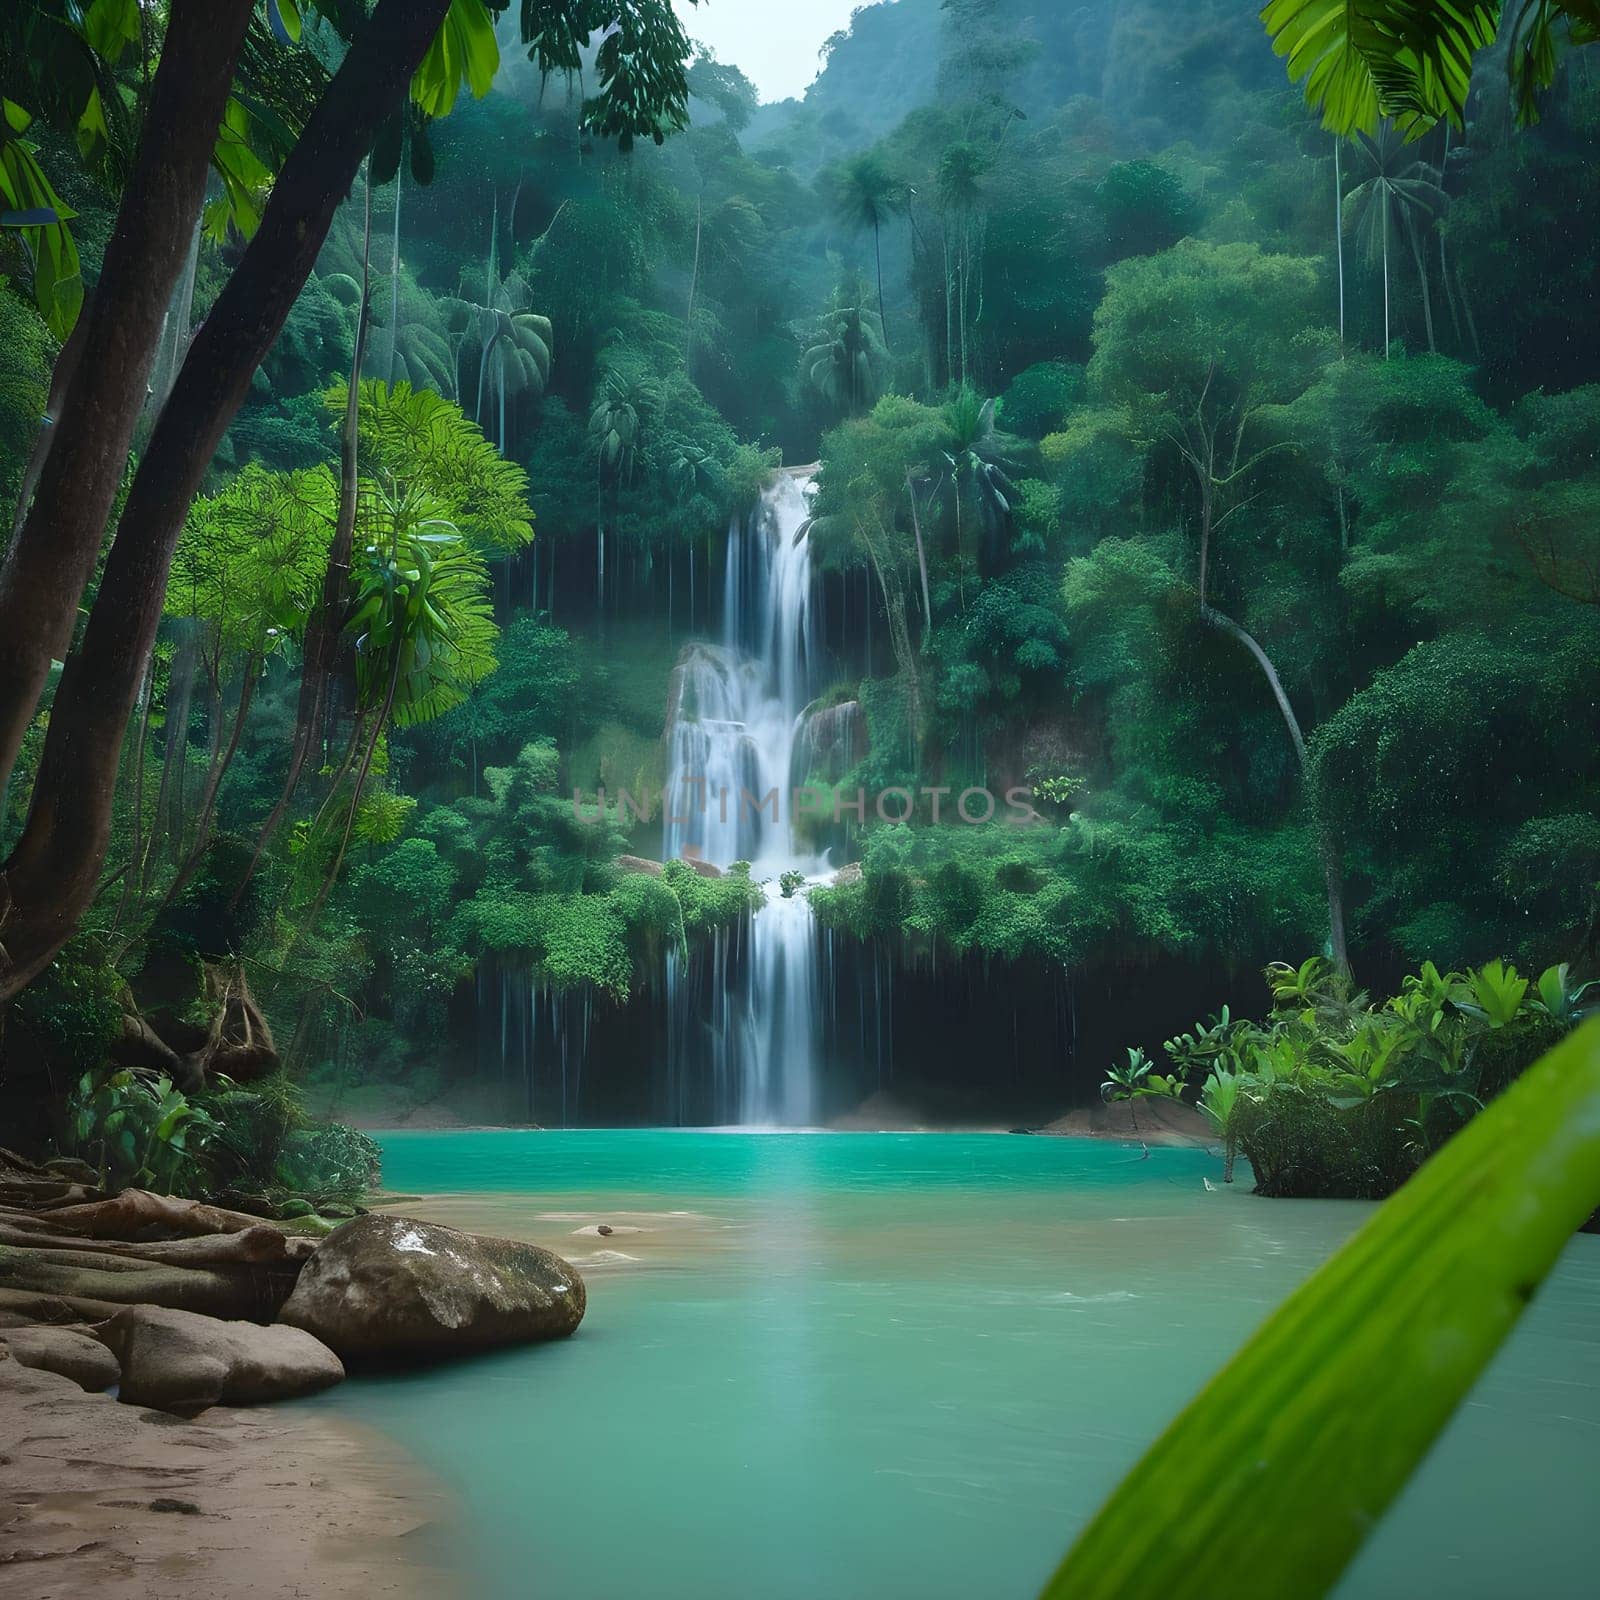 Turquoise Tranquility: Exploring the Kuang Si Cascade Waterfall